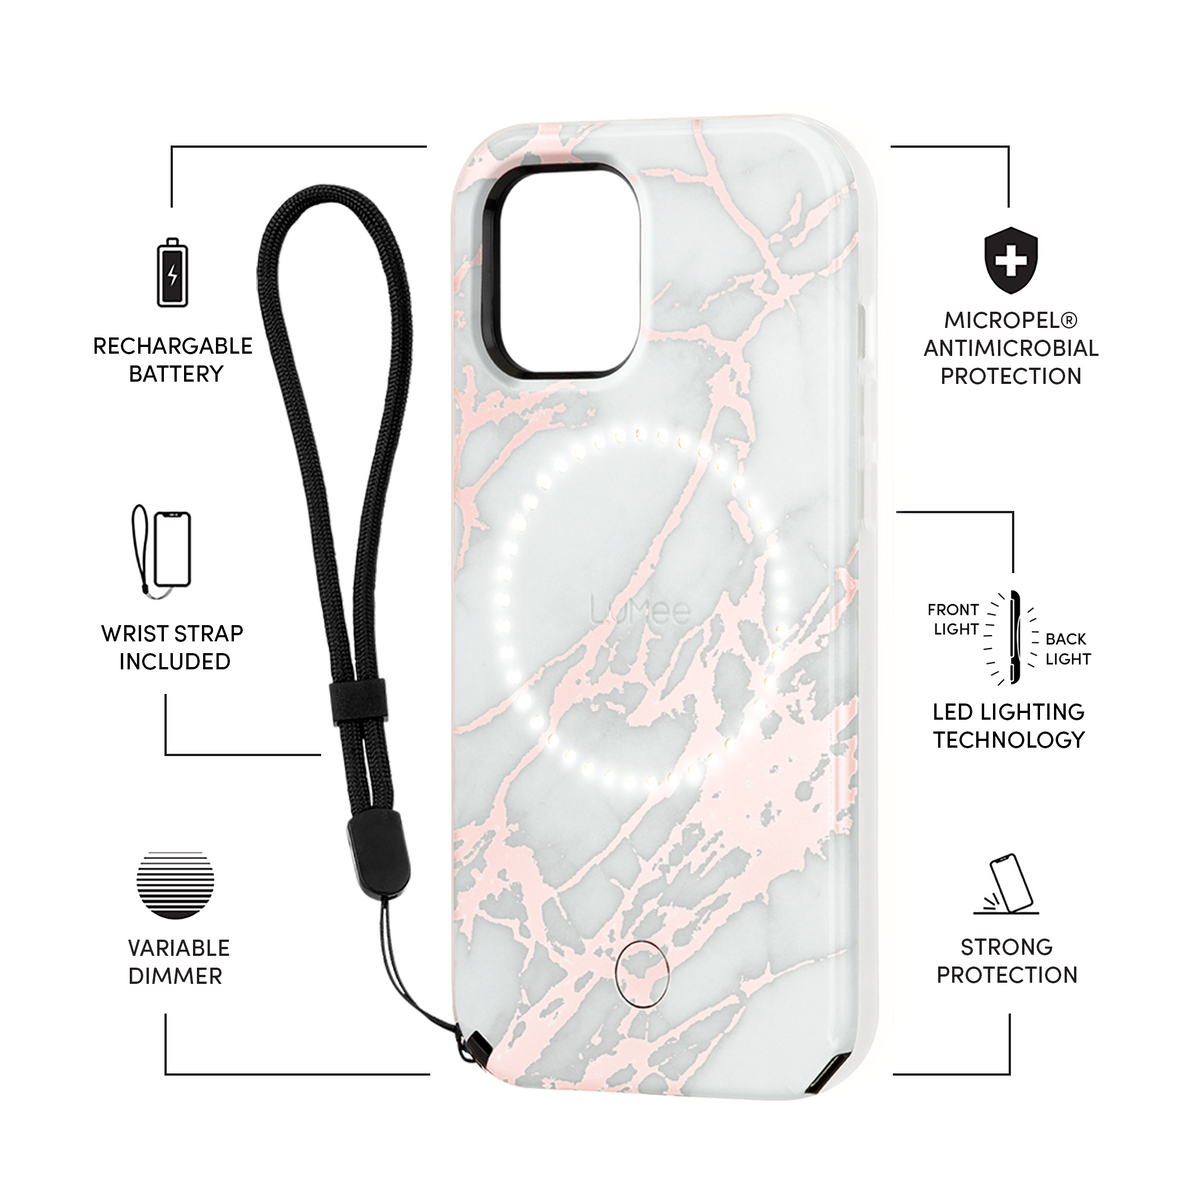 LUMEE Halo Selfie Light Case for iPhone 12 Pro Max - Rose Gold White Marble